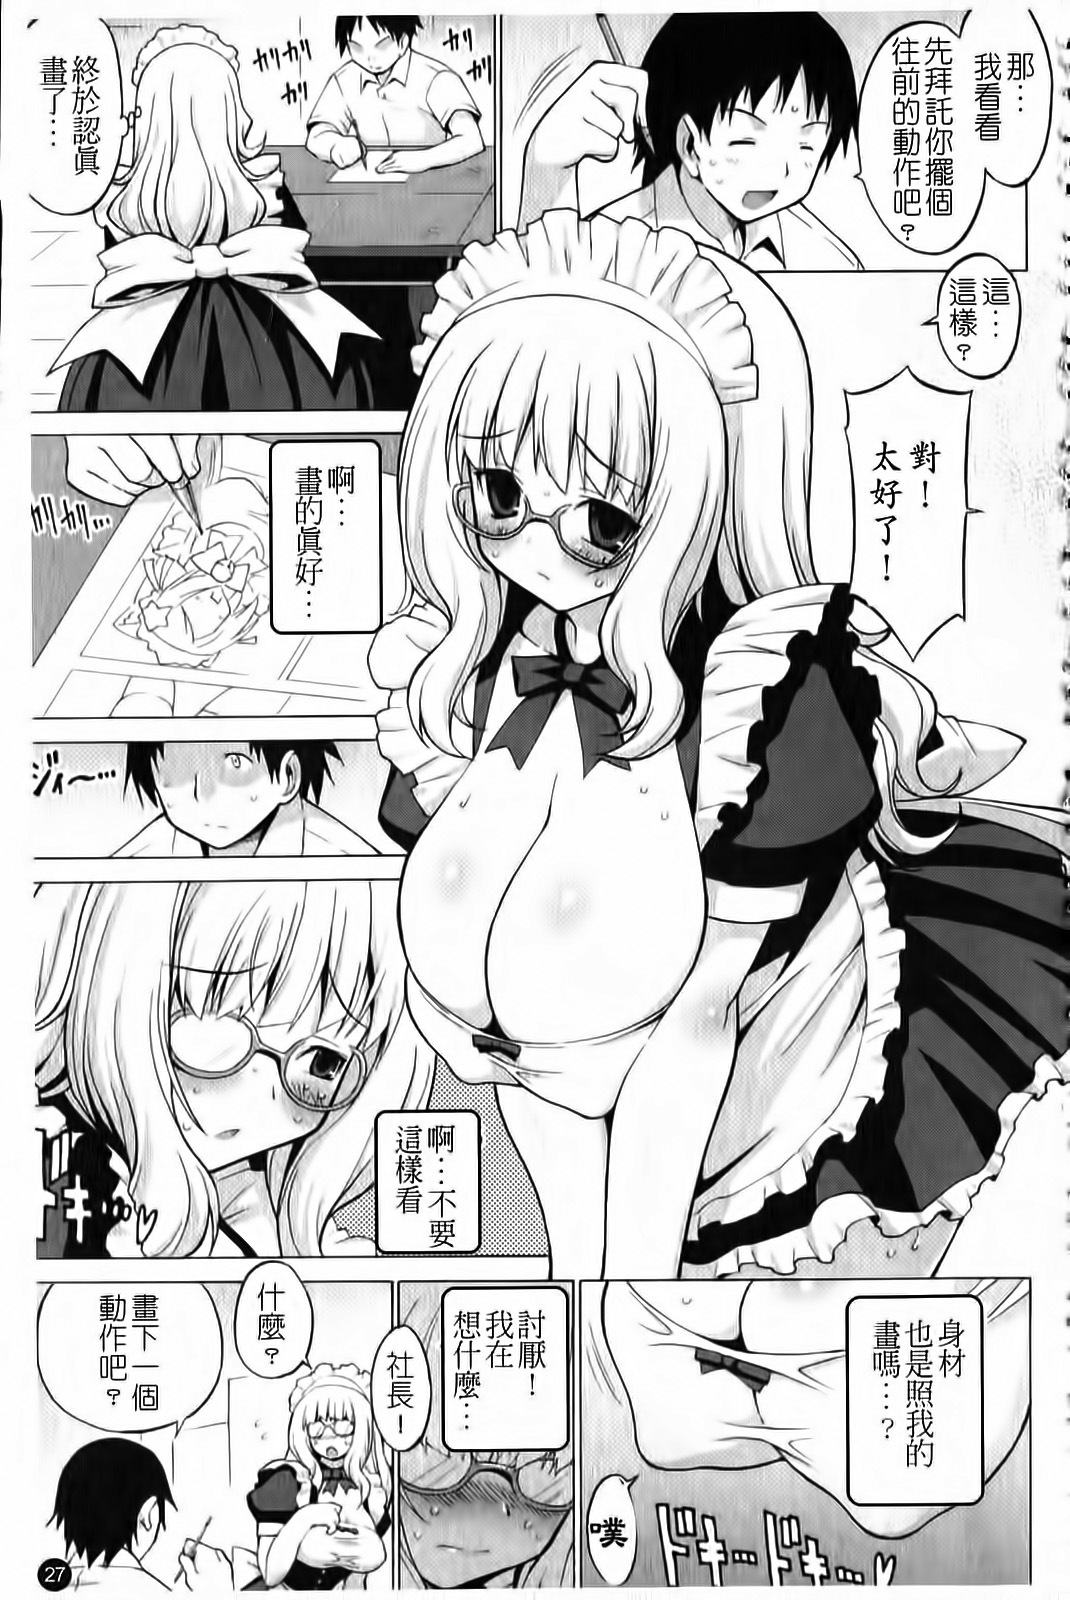 [Onomeshin] Oppai Party [Chinese] page 28 full